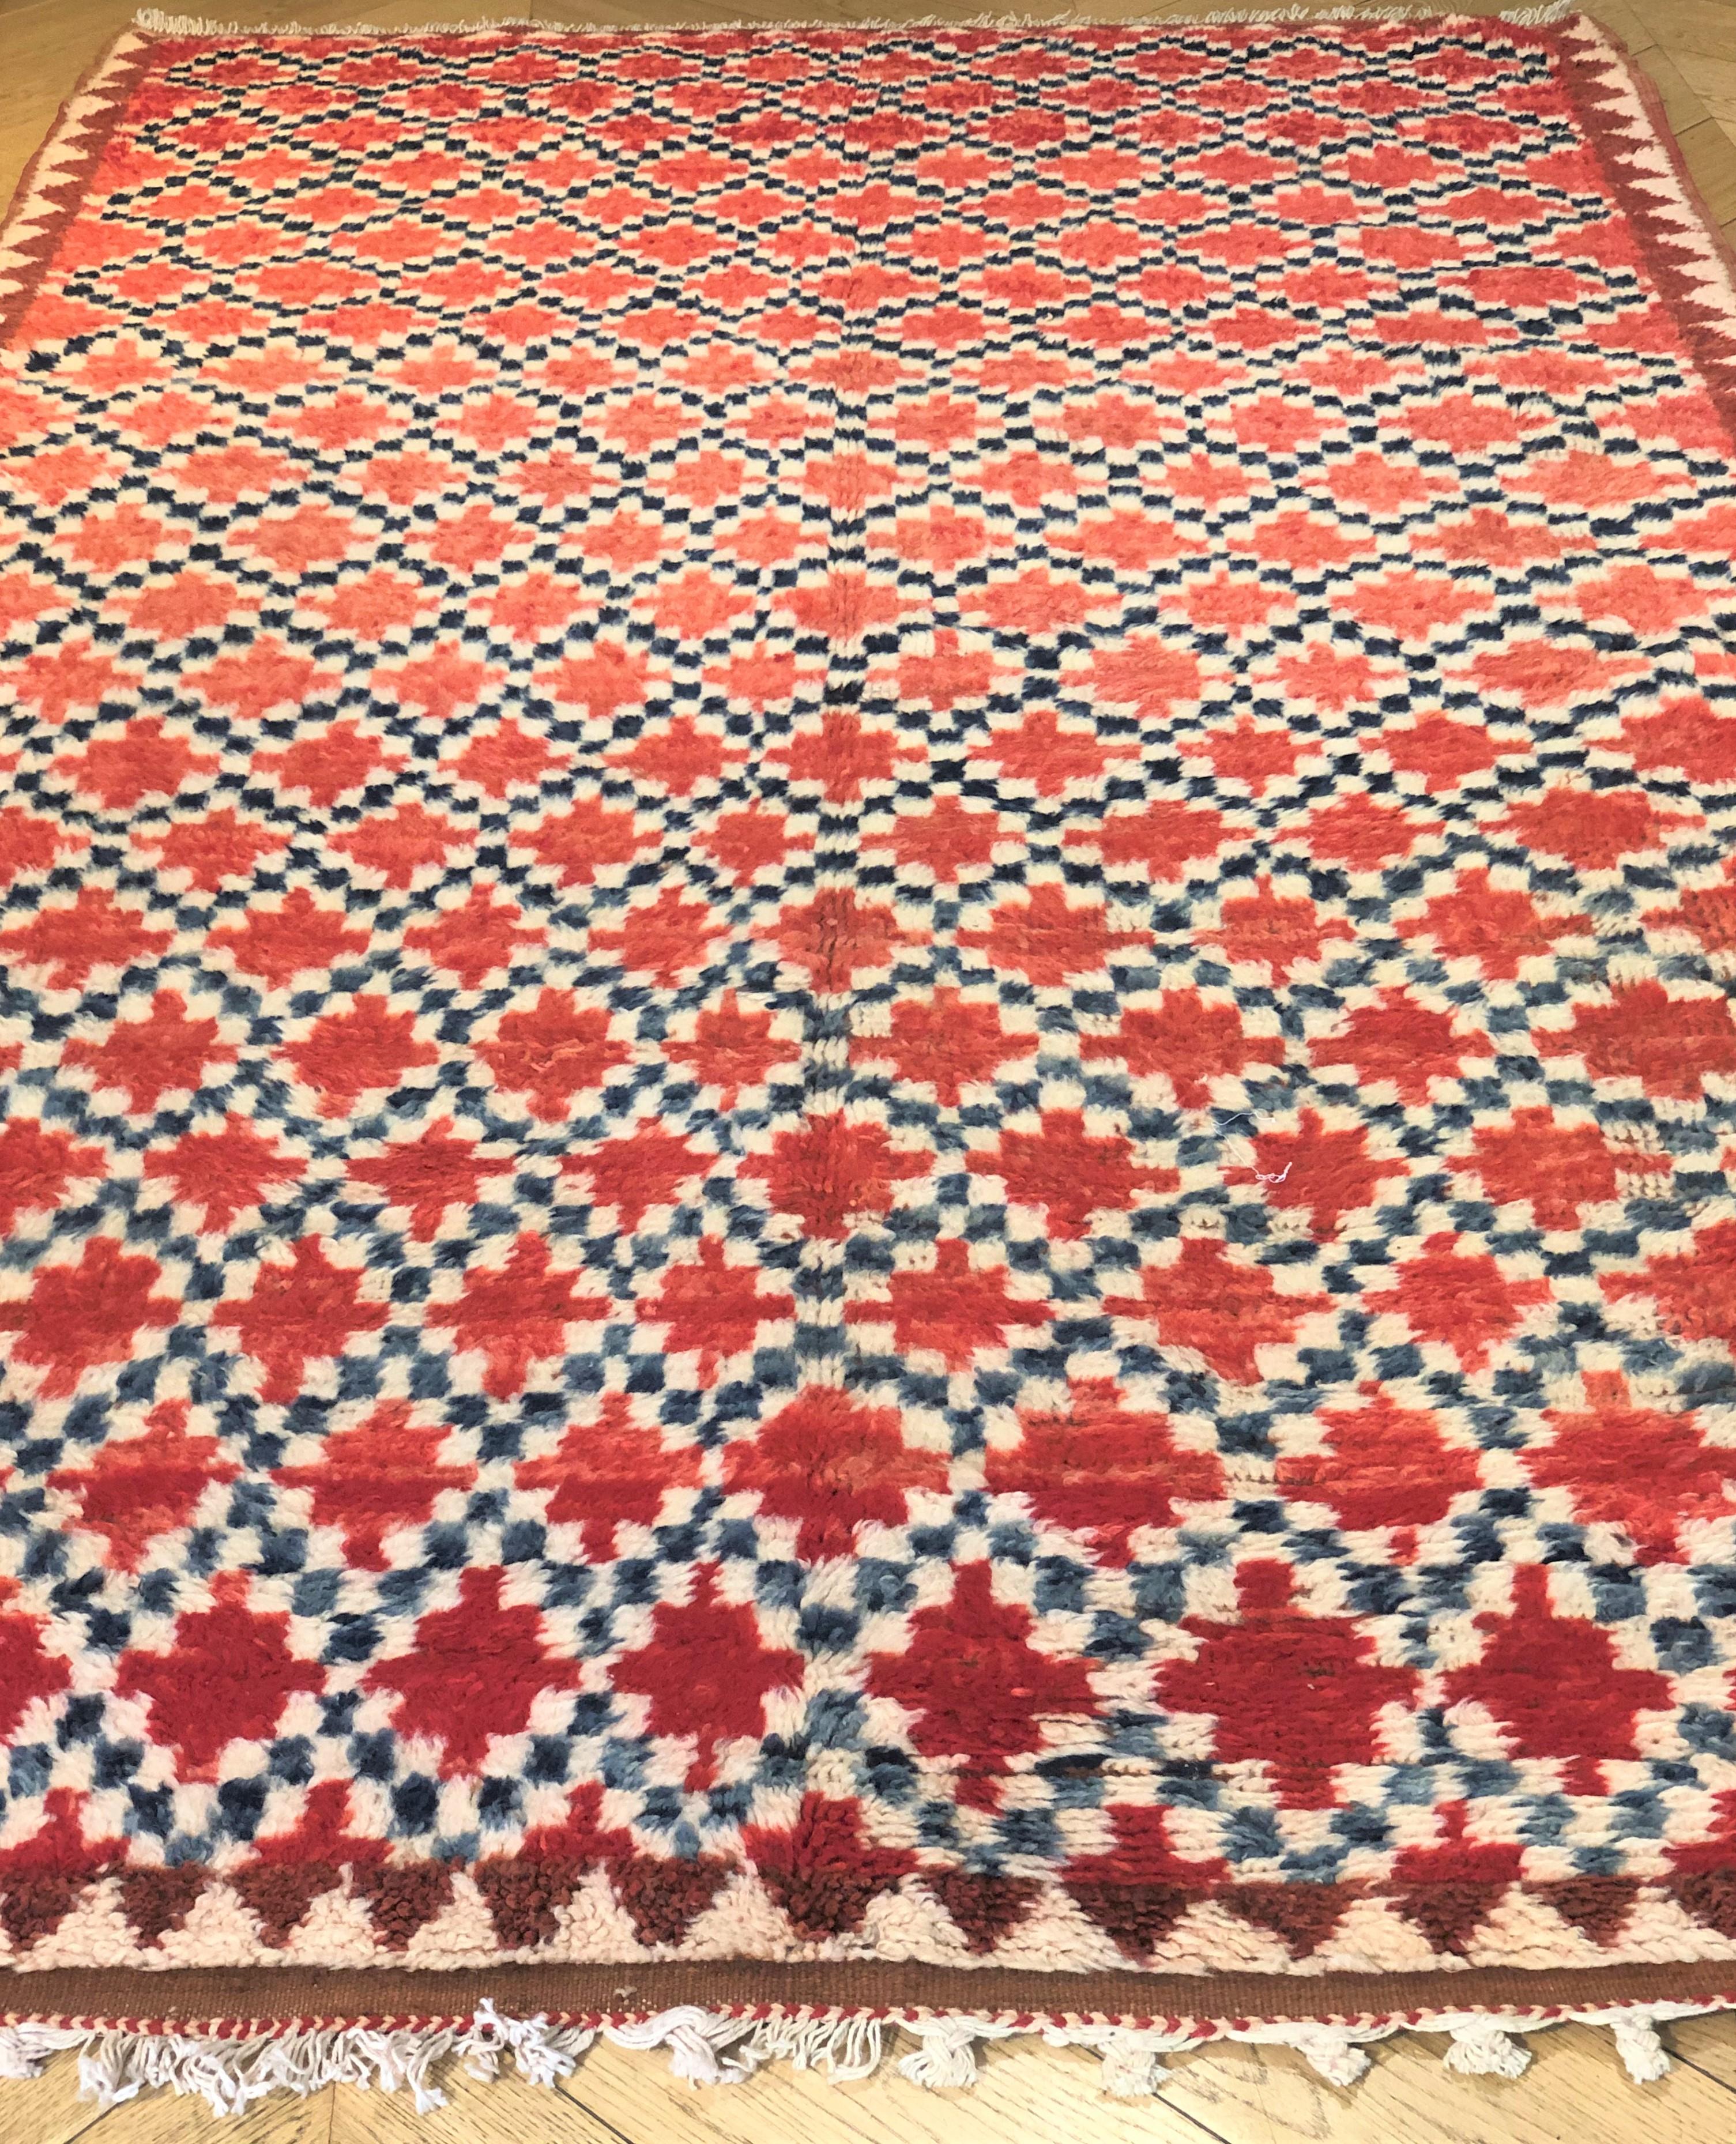 20393 Berber cm. 255 x 147 € 2,800
Beautiful vintage Azilal carpet with different shades of red / orange, cream white, black. The Azilal carpets come from the steep and steep Azilal (Moroccan region of the Berberi), located in the remote and